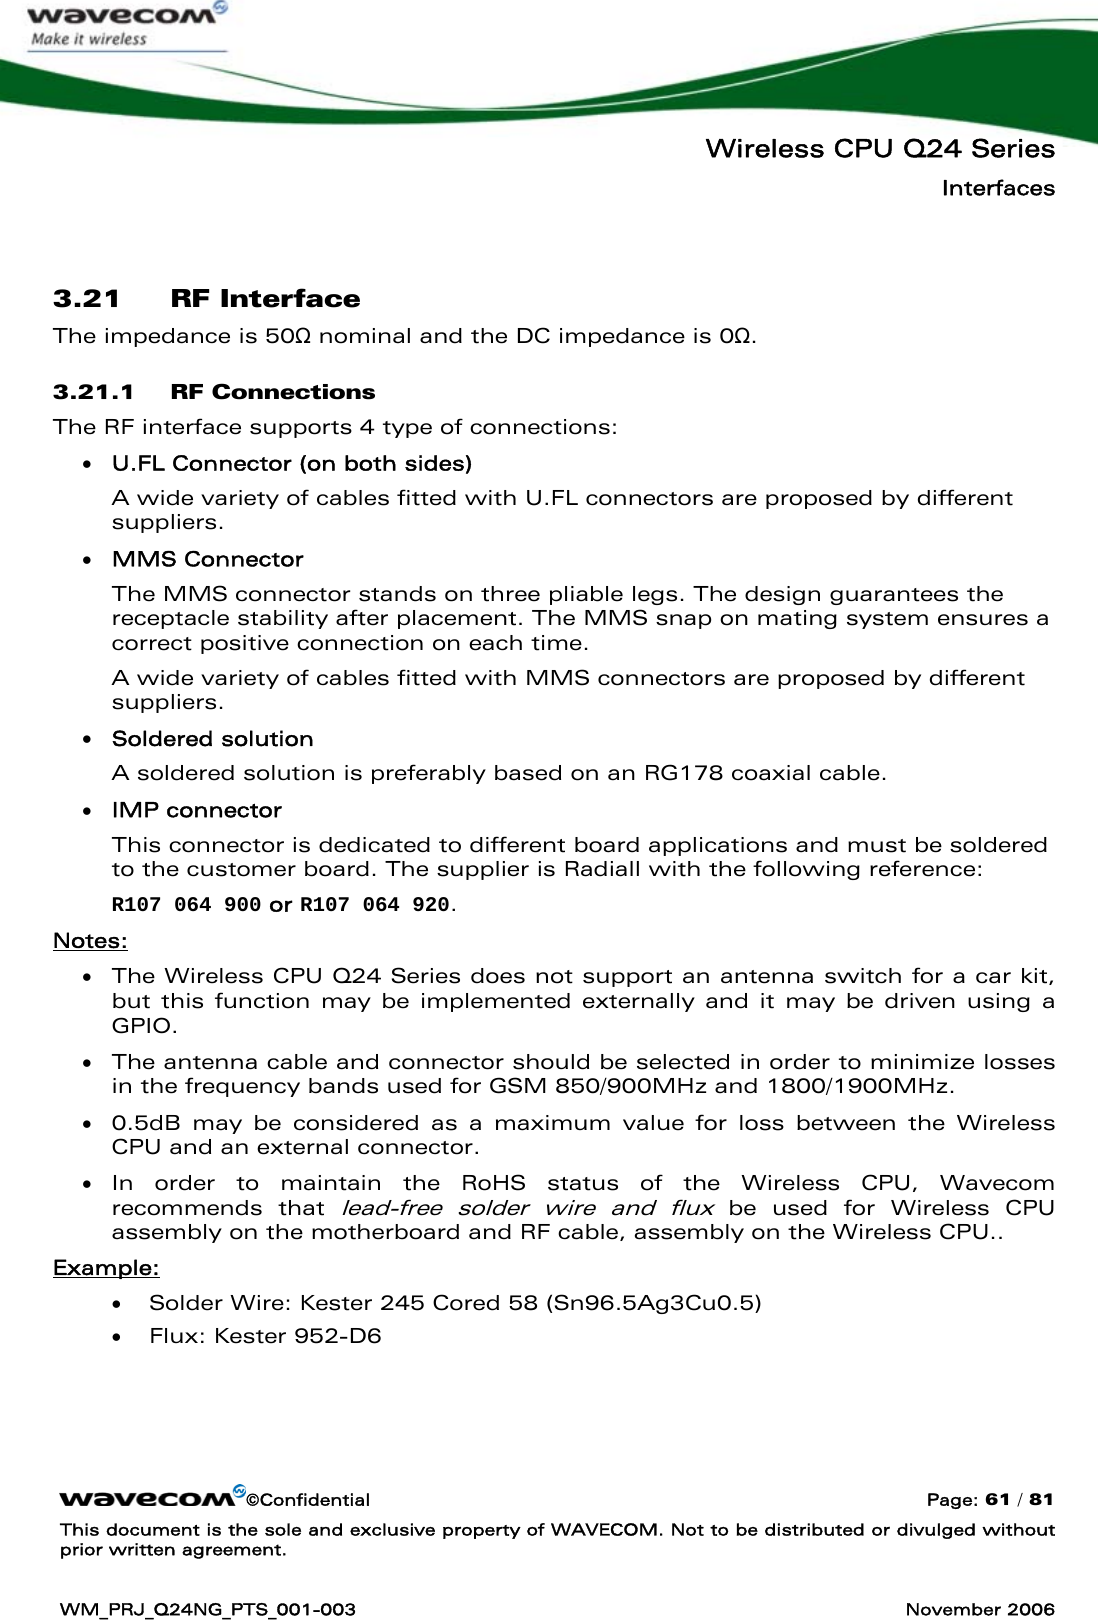   Wireless CPU Q24 Series Interfaces ©Confidential  Page: 61 / 81 This document is the sole and exclusive property of WAVECOM. Not to be distributed or divulged without prior written agreement.  WM_PRJ_Q24NG_PTS_001-003  November 2006   3.21 RF Interface The impedance is 50Ω nominal and the DC impedance is 0Ω. 3.21.1 RF Connections The RF interface supports 4 type of connections: • U.FL Connector (on both sides) A wide variety of cables fitted with U.FL connectors are proposed by different suppliers. • MMS Connector The MMS connector stands on three pliable legs. The design guarantees the receptacle stability after placement. The MMS snap on mating system ensures a correct positive connection on each time. A wide variety of cables fitted with MMS connectors are proposed by different suppliers. • Soldered solution  A soldered solution is preferably based on an RG178 coaxial cable. • IMP connector  This connector is dedicated to different board applications and must be soldered to the customer board. The supplier is Radiall with the following reference:  R107 064 900 or R107 064 920. Notes: • The Wireless CPU Q24 Series does not support an antenna switch for a car kit, but this function may be implemented externally and it may be driven using a GPIO. • The antenna cable and connector should be selected in order to minimize losses in the frequency bands used for GSM 850/900MHz and 1800/1900MHz. • 0.5dB may be considered as a maximum value for loss between the Wireless CPU and an external connector. • In order to maintain the RoHS status of the Wireless CPU, Wavecom recommends that lead-free solder wire and flux be used for Wireless CPU assembly on the motherboard and RF cable, assembly on the Wireless CPU.. Example: • Solder Wire: Kester 245 Cored 58 (Sn96.5Ag3Cu0.5) • Flux: Kester 952-D6   